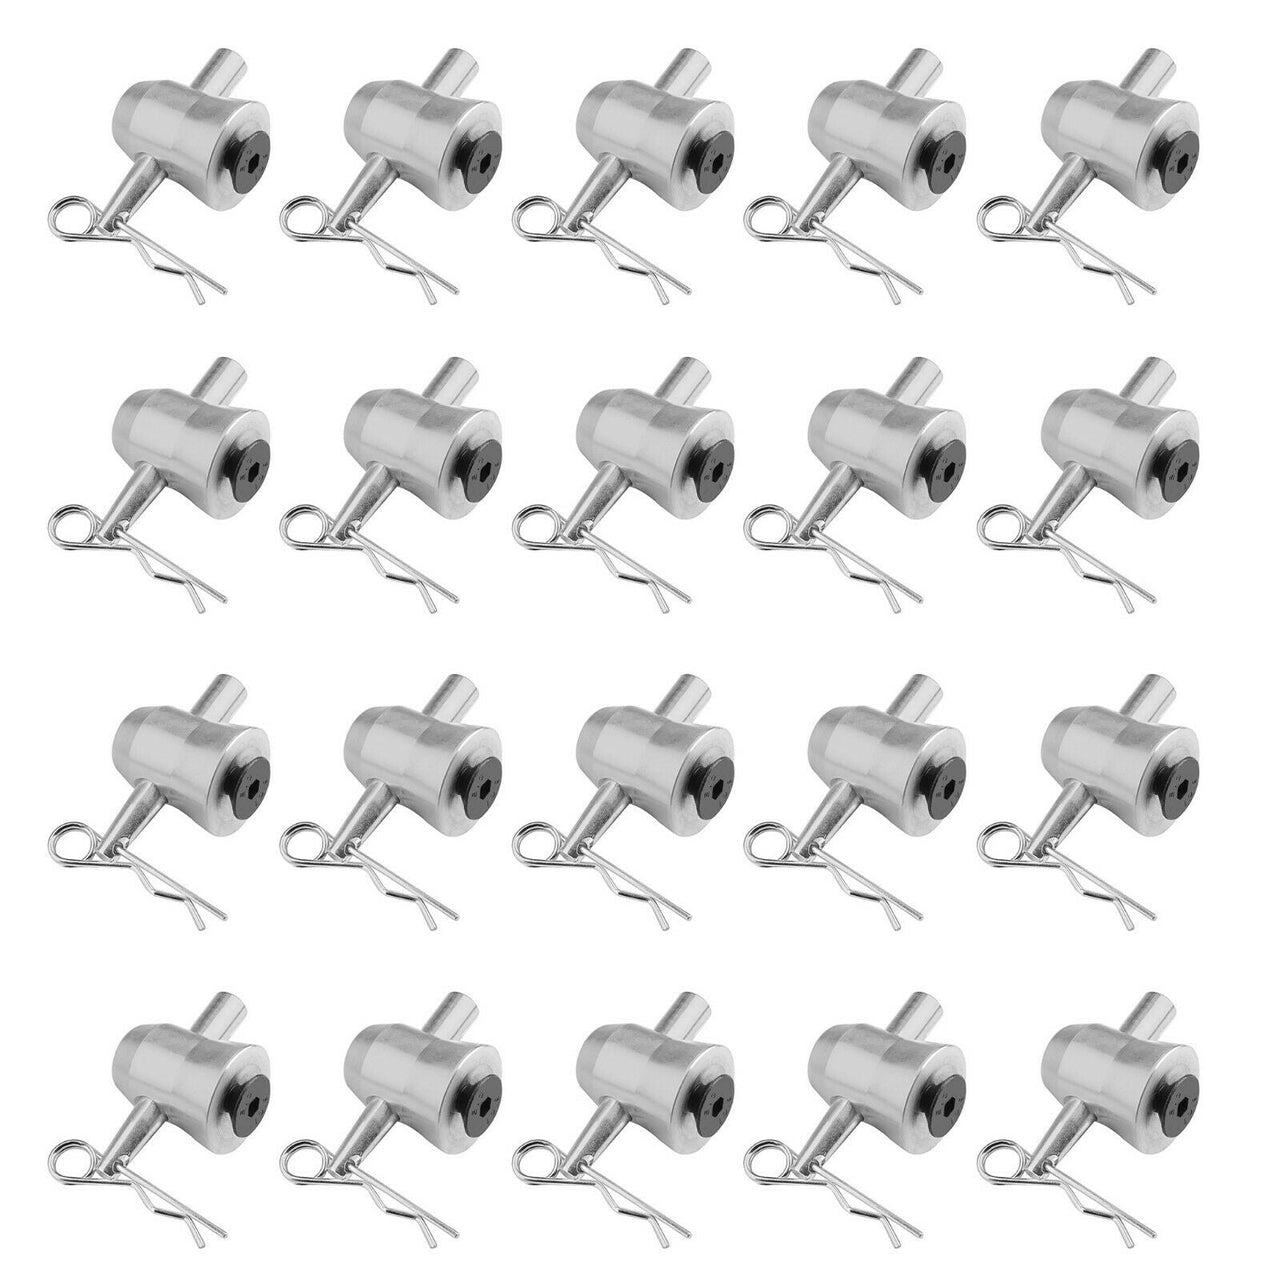 20 MR DJ THCC15PAK Half Conical Coupler for Truss DJ Stage Lighting w/ Body Safety Clips Pins